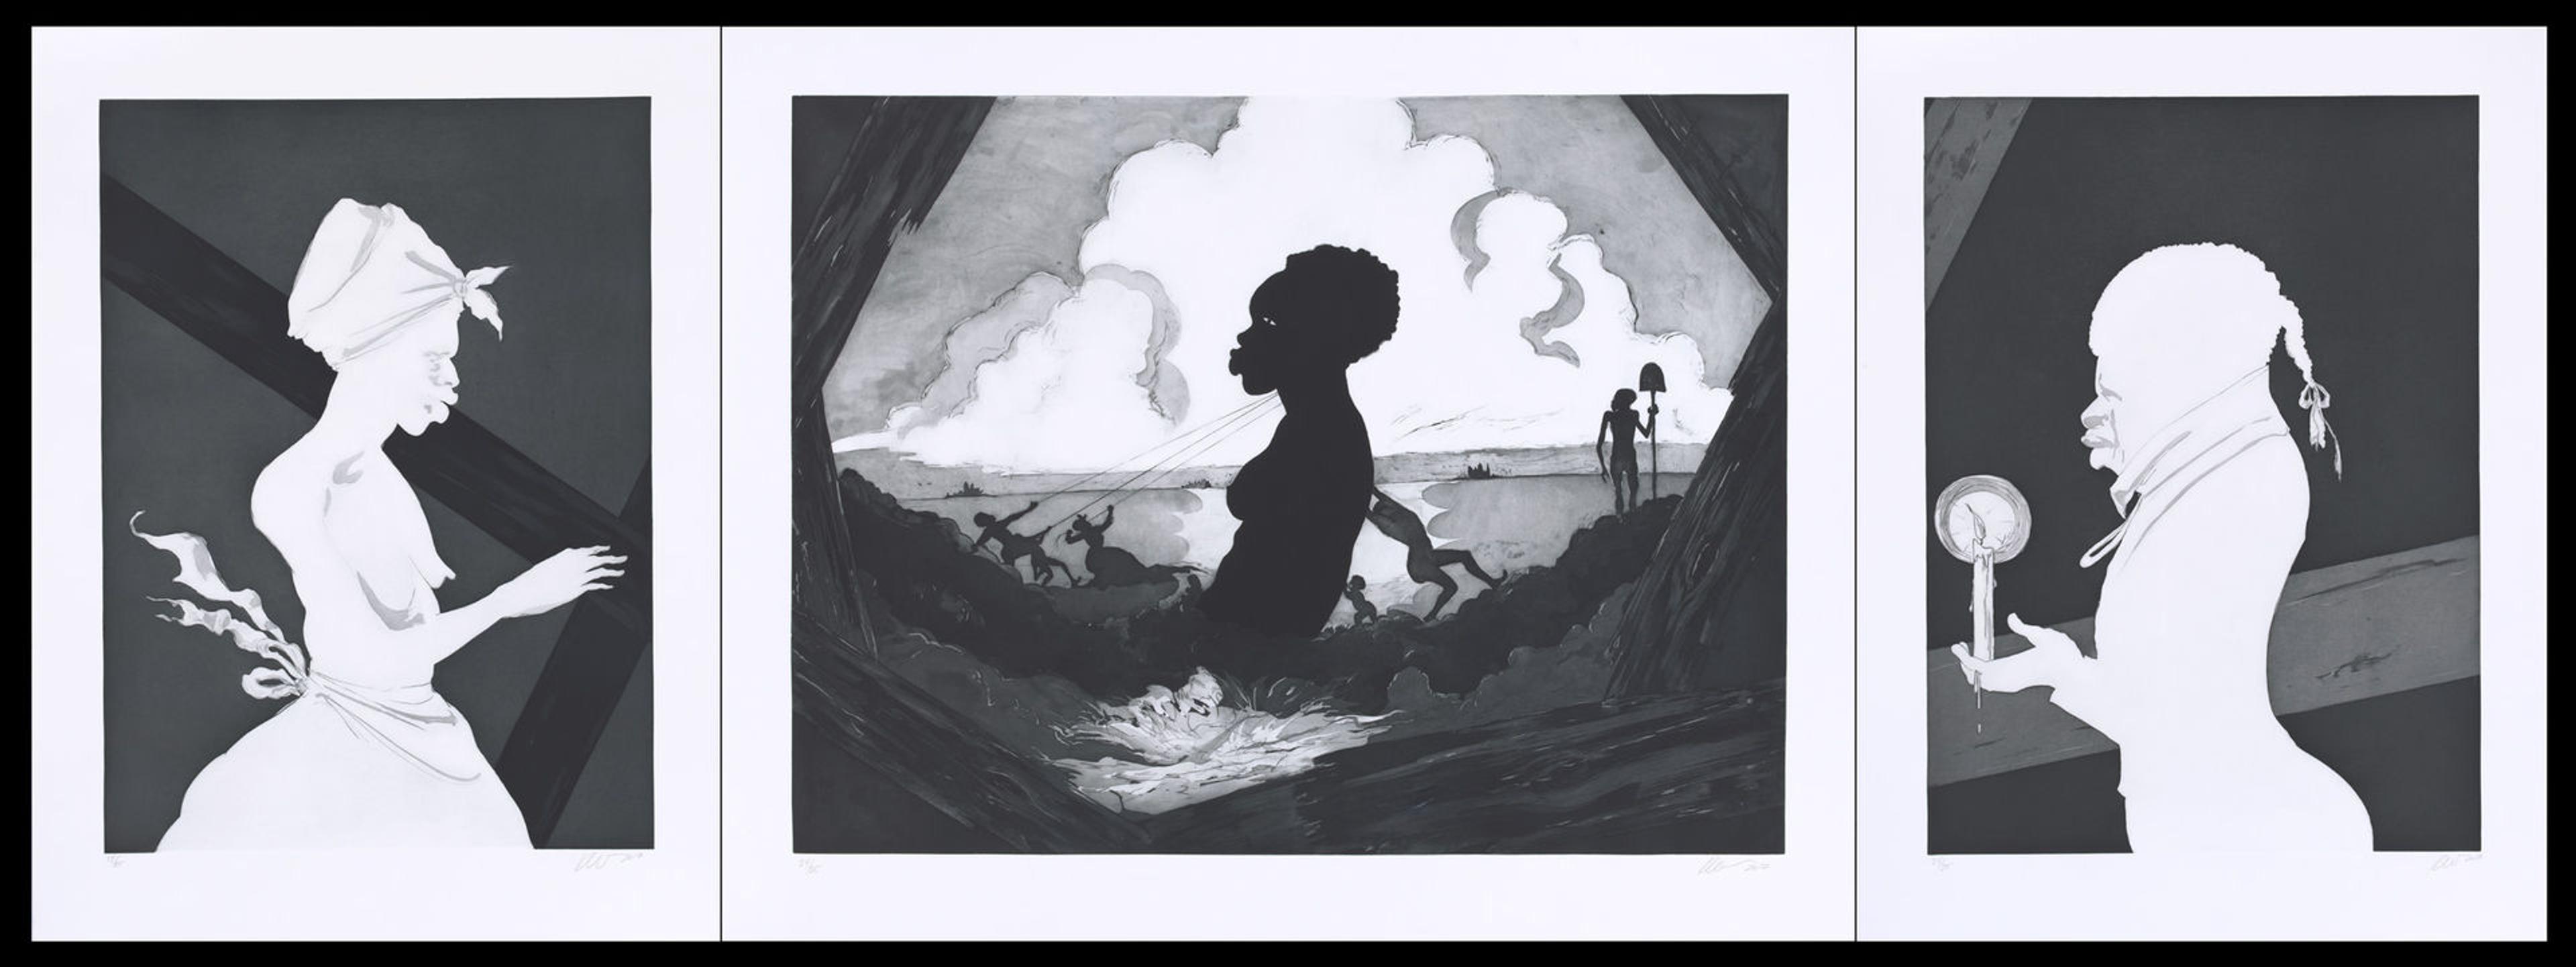 A paper triptych by Kara Walker showing the erection of a large statue of a woman (center) between profile portraits of a woman (left) and man (right)